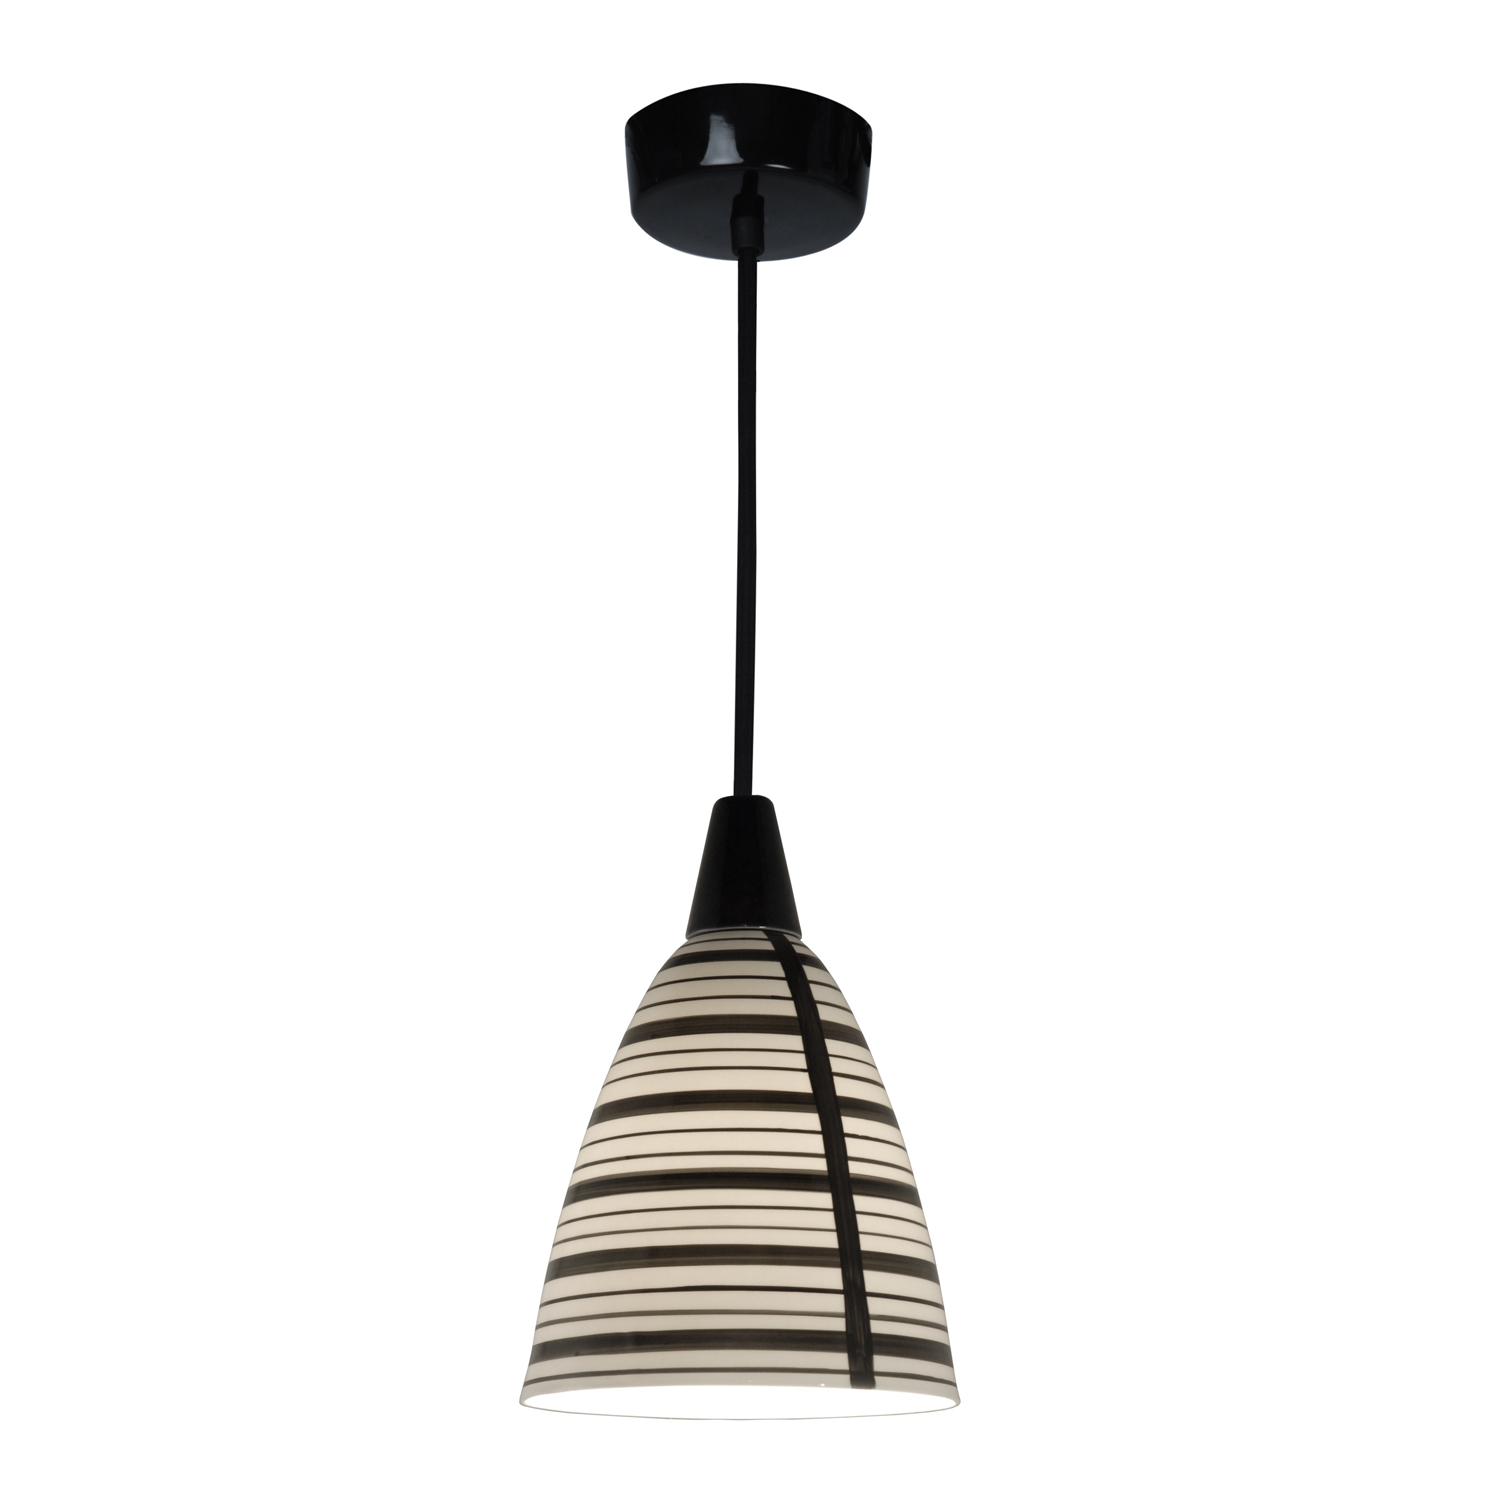 Circle Line Pendant with hand painted black lines